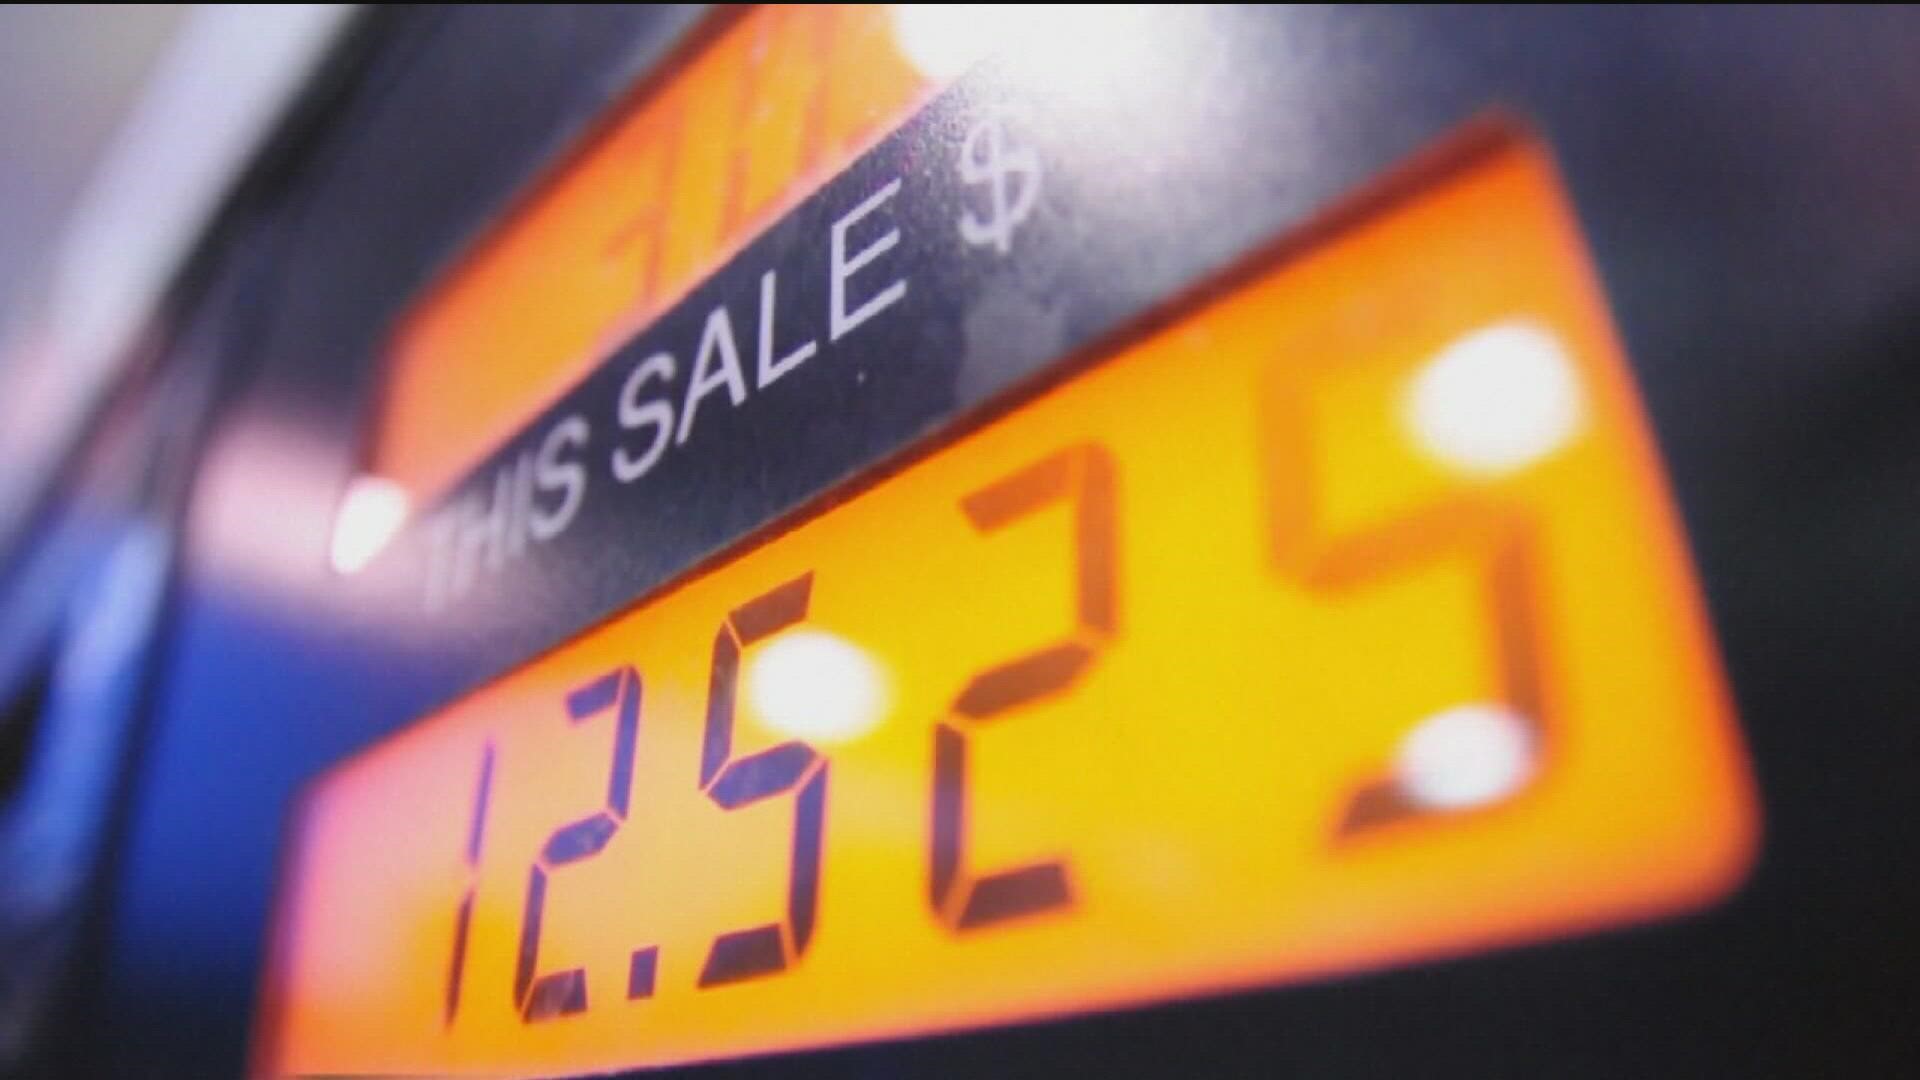 San Diego's average price per gallon was $6.29 for regular gas Tuesday, according to AAA.